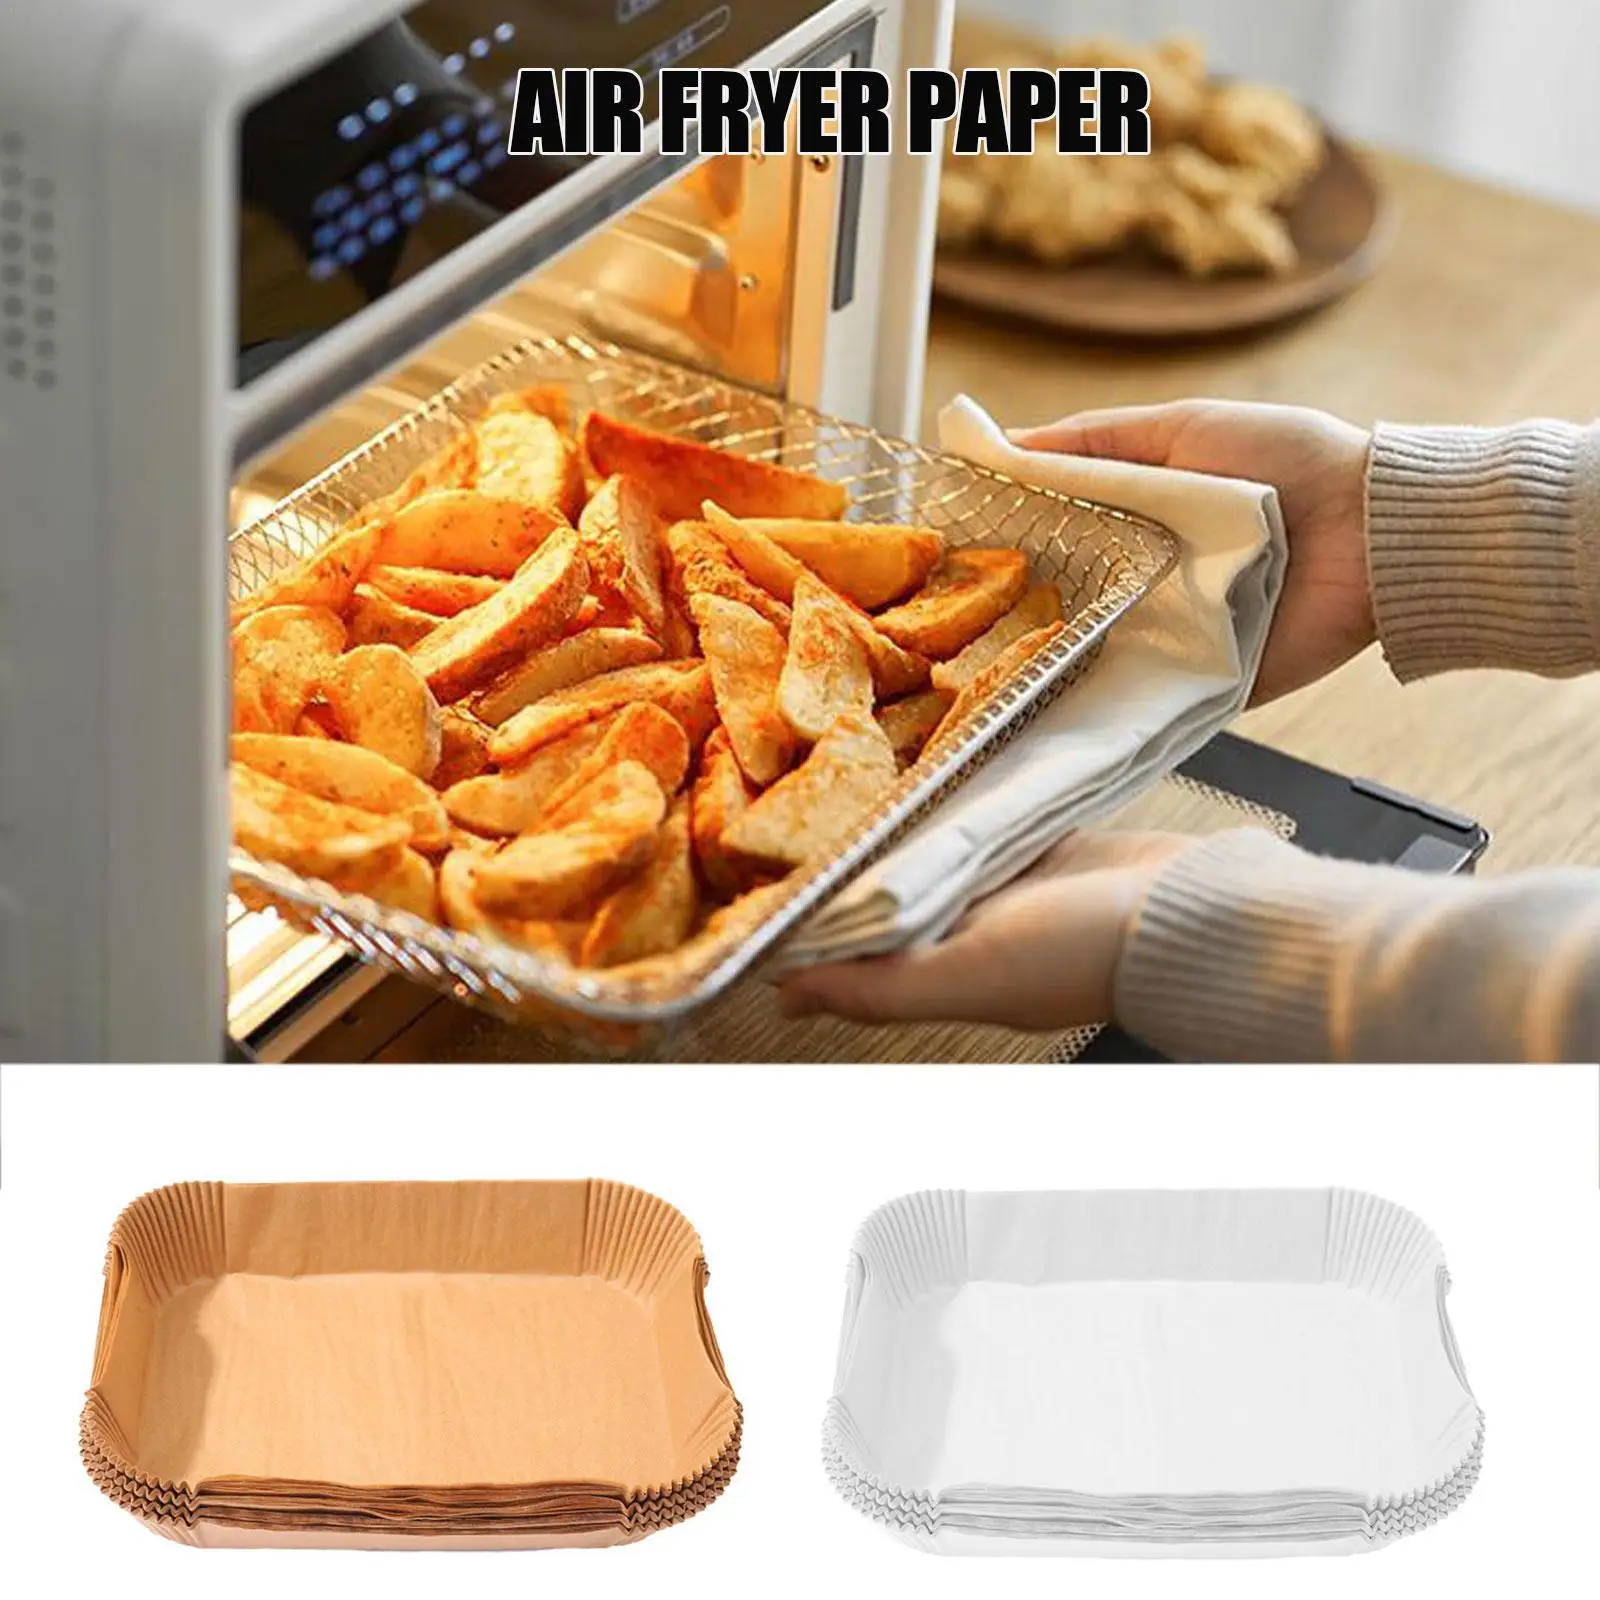 50/100Pcs Baking Oil Paper Air Fryer Special Oil Paper Tray Kitchen Baking Square Non-stick Paper Liner Baking Tool Accessories